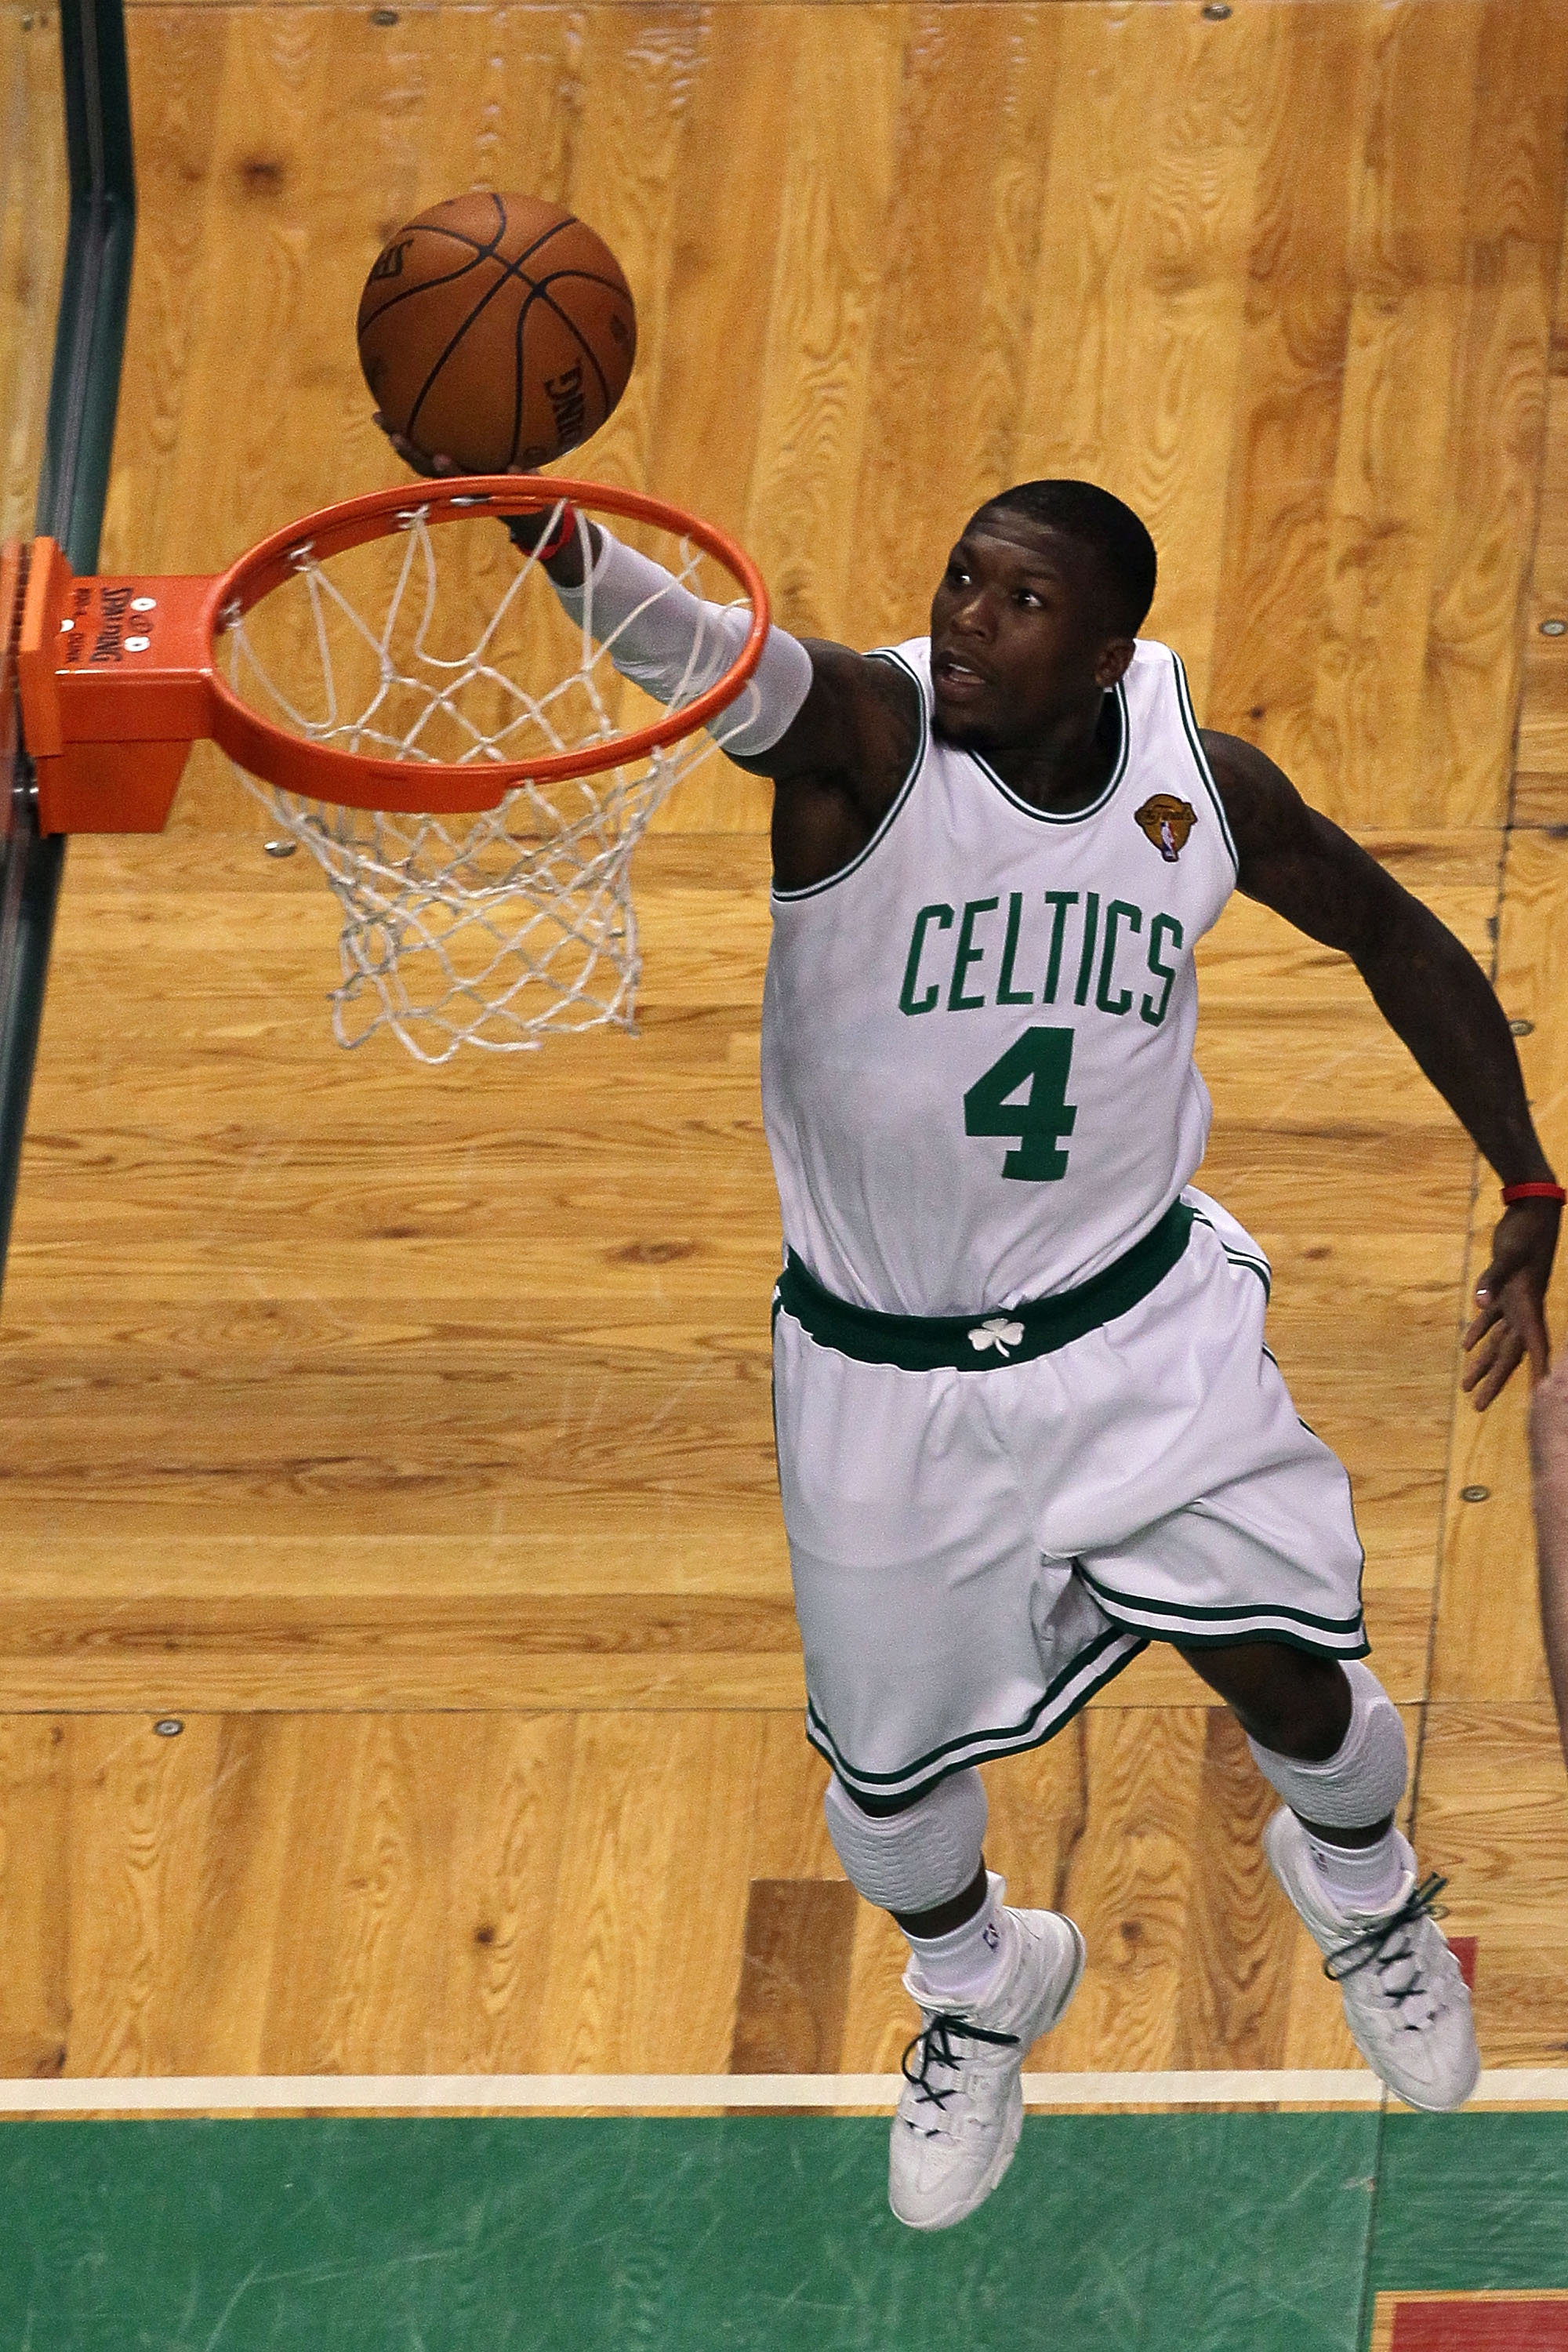 BOSTON - JUNE 13:  Nate Robinson #4 of the Boston Celtics goes to the basket against the Los Angeles Lakers during Game Five of the 2010 NBA Finals on June 13, 2010 at TD Garden in Boston, Massachusetts. The Celtics won 92-86. NOTE TO USER: User expressly